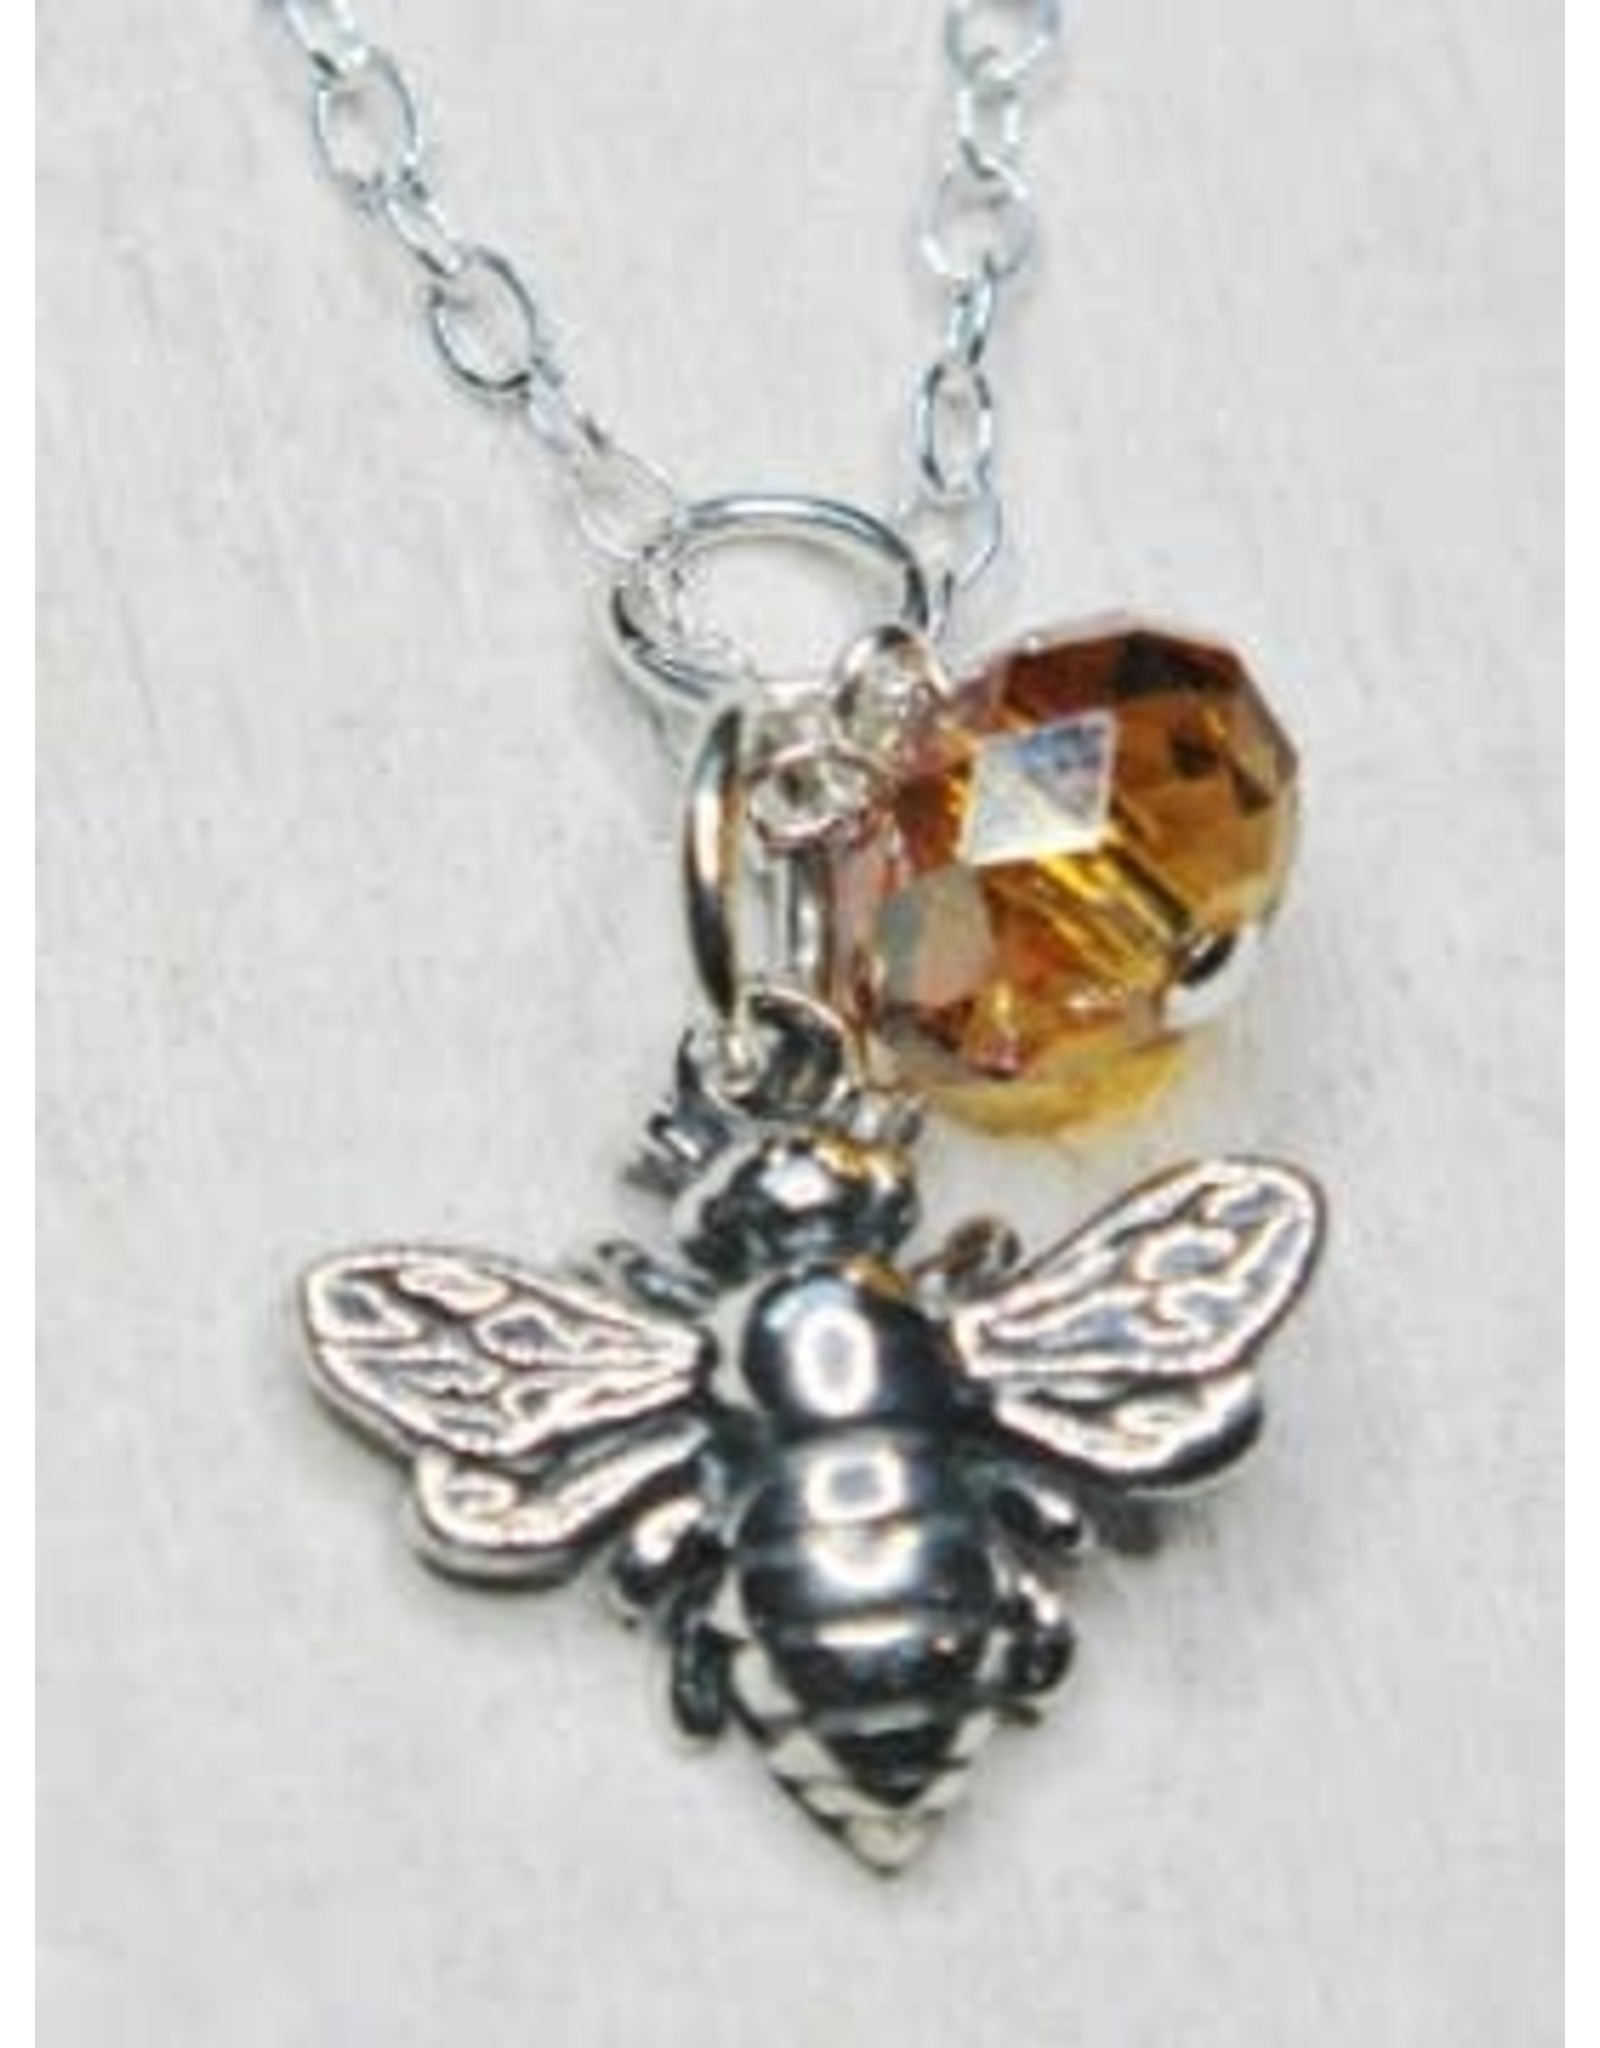 New Silver 18 Inch Cubic Zirconia Manchester Bee Necklace